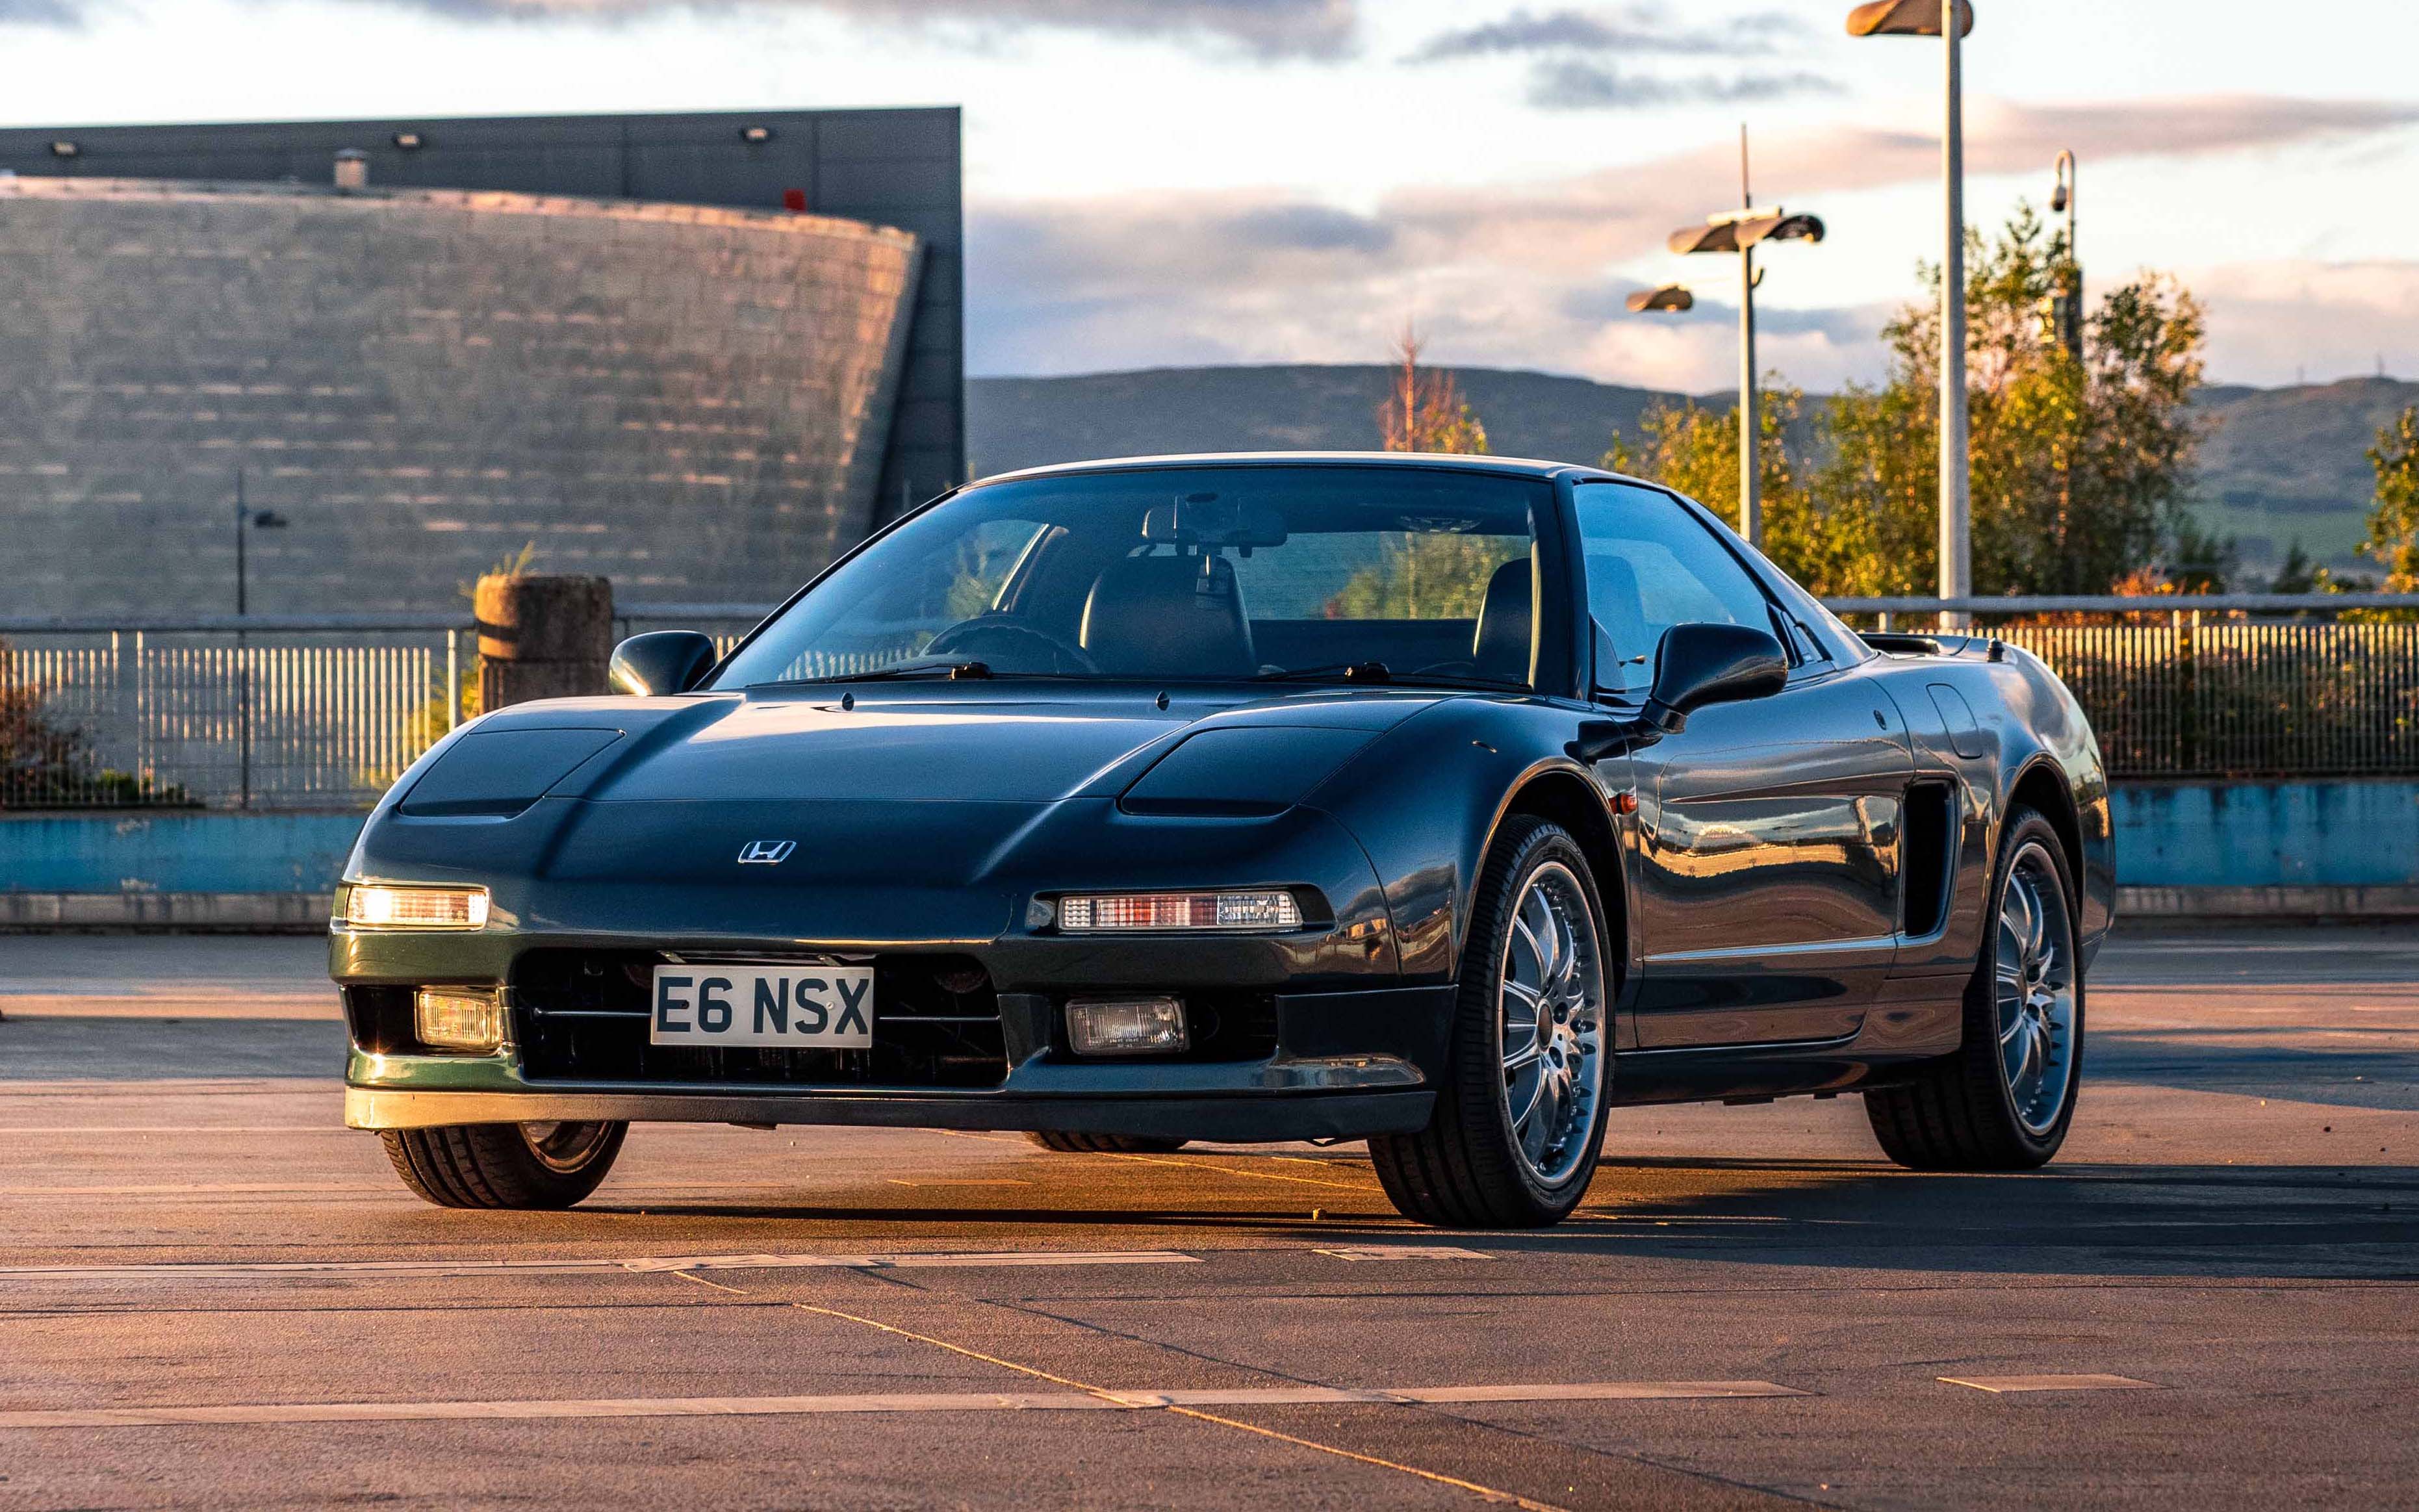 1995 HONDA NSX - MANUAL for sale by auction in Glasgow, Scotland